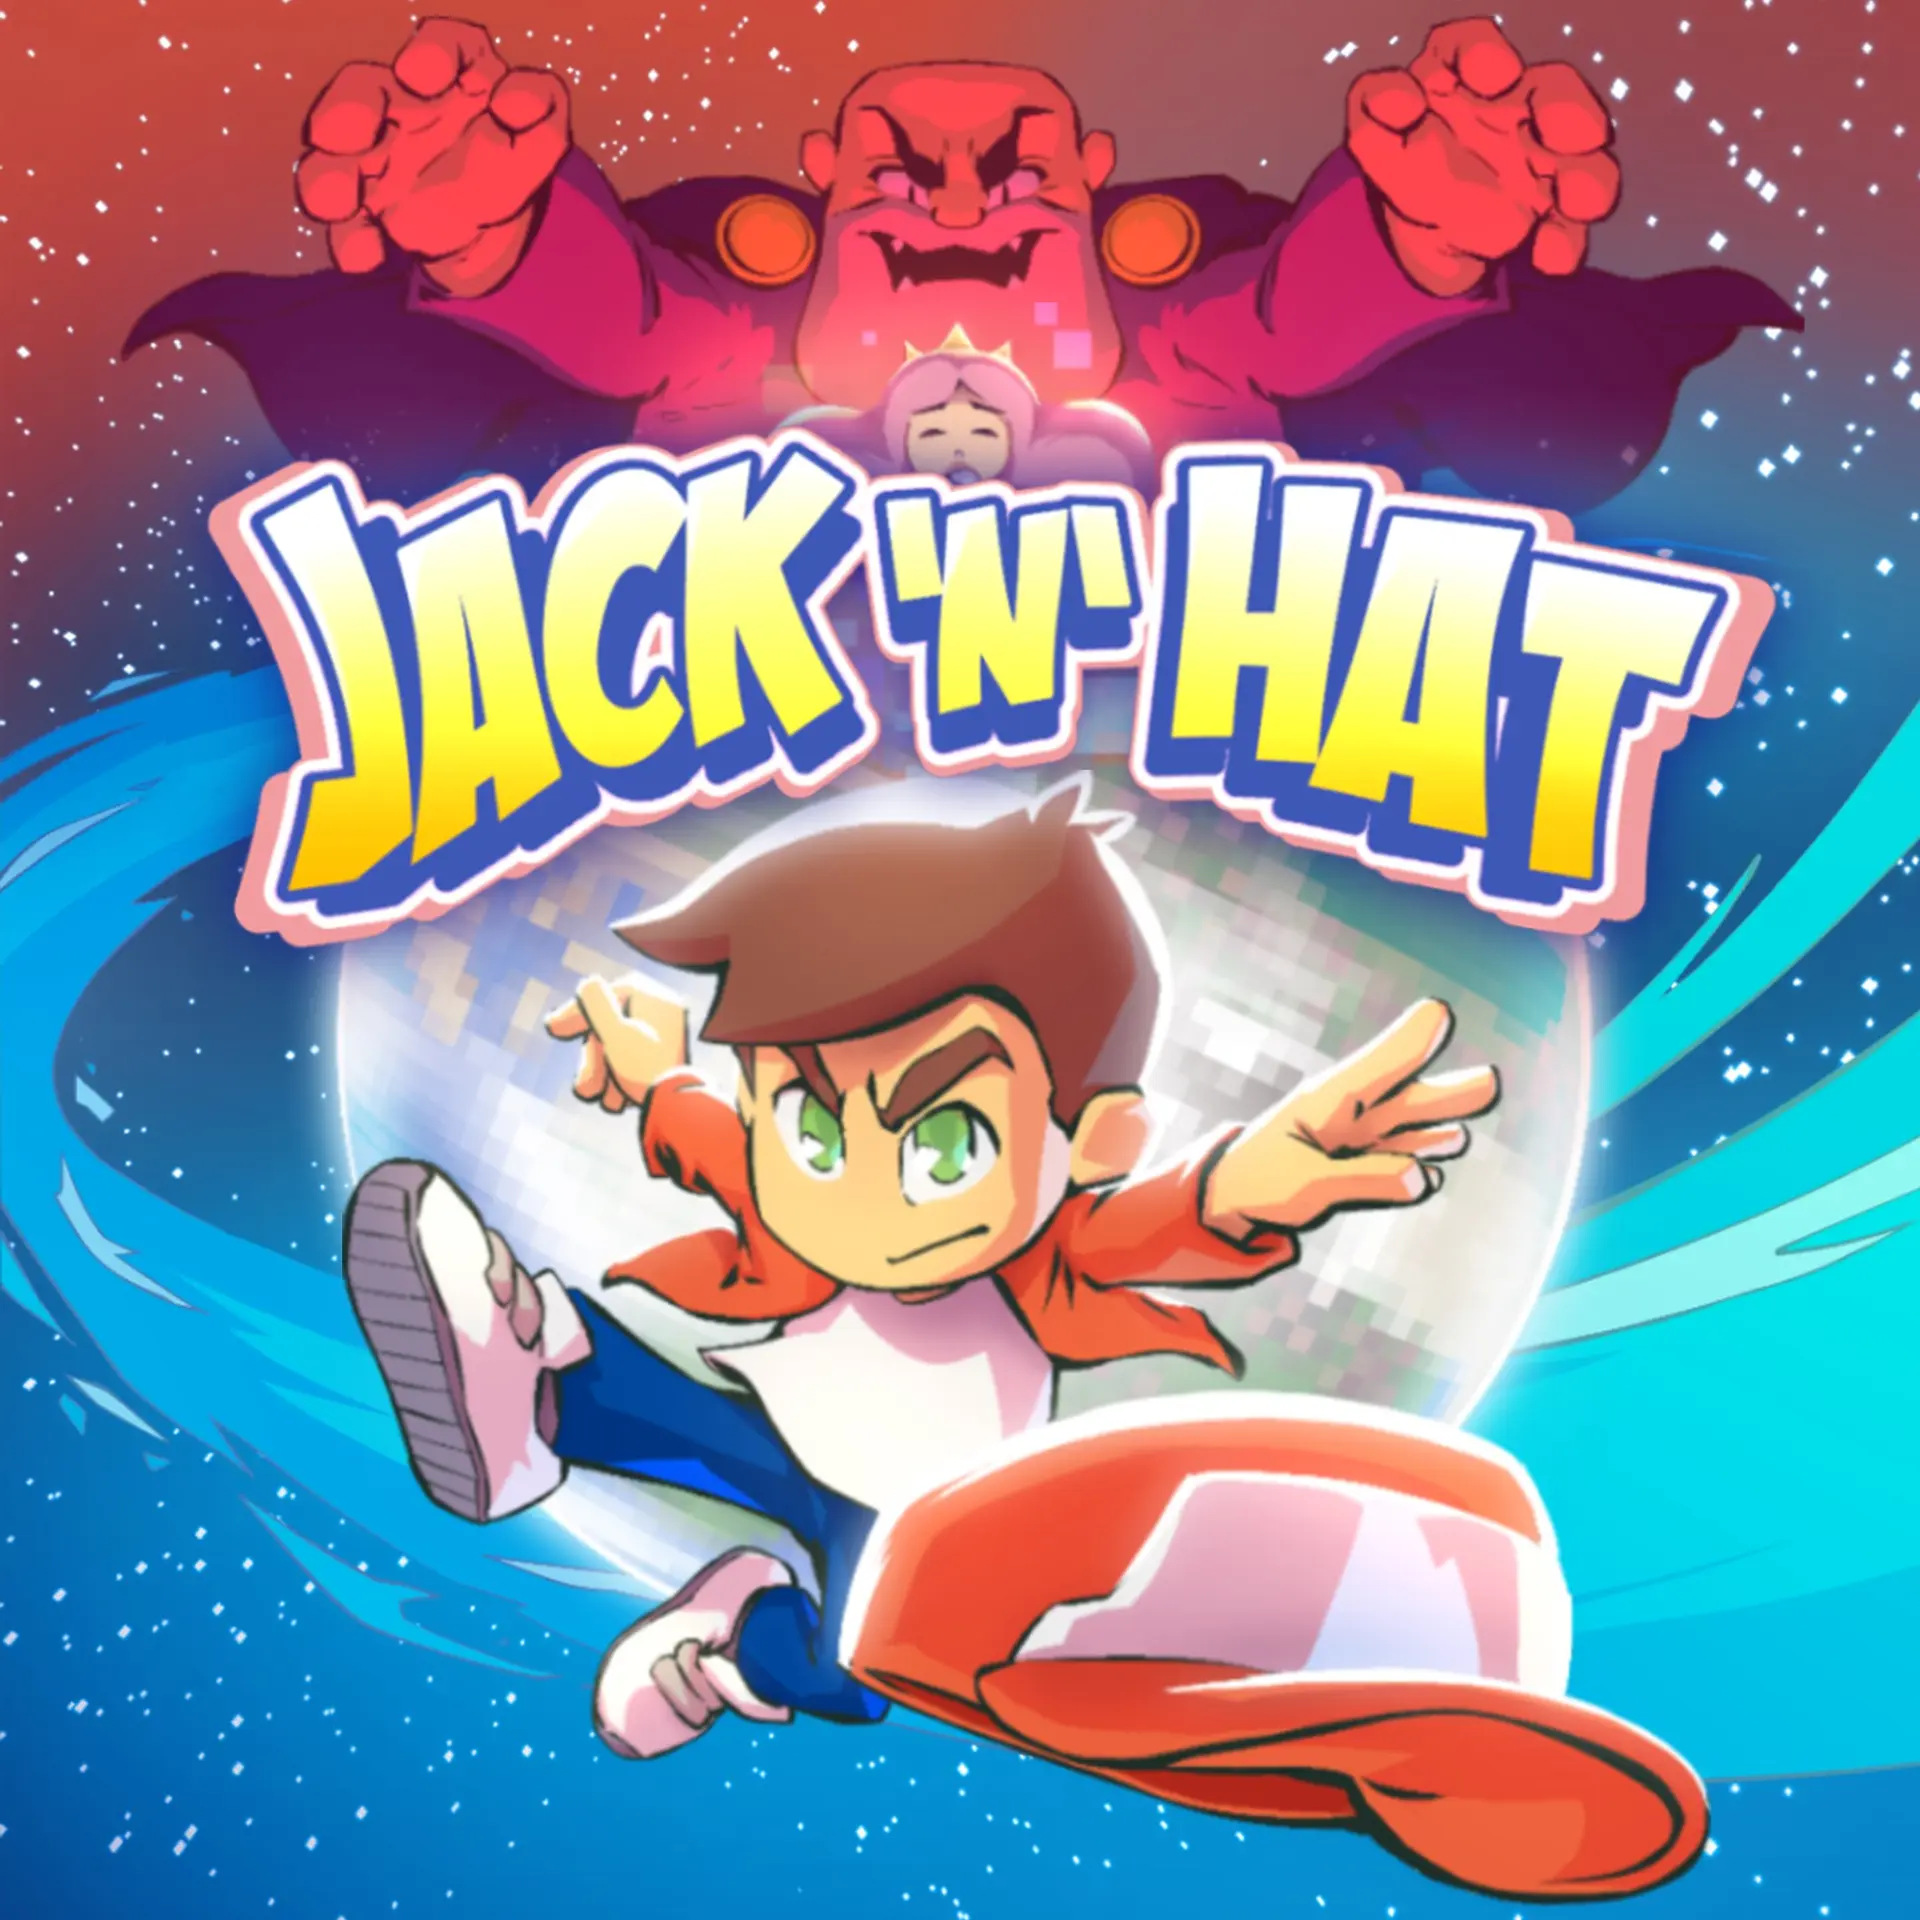 Jack 'n' Hat (XBOX One - Cheapest Store)